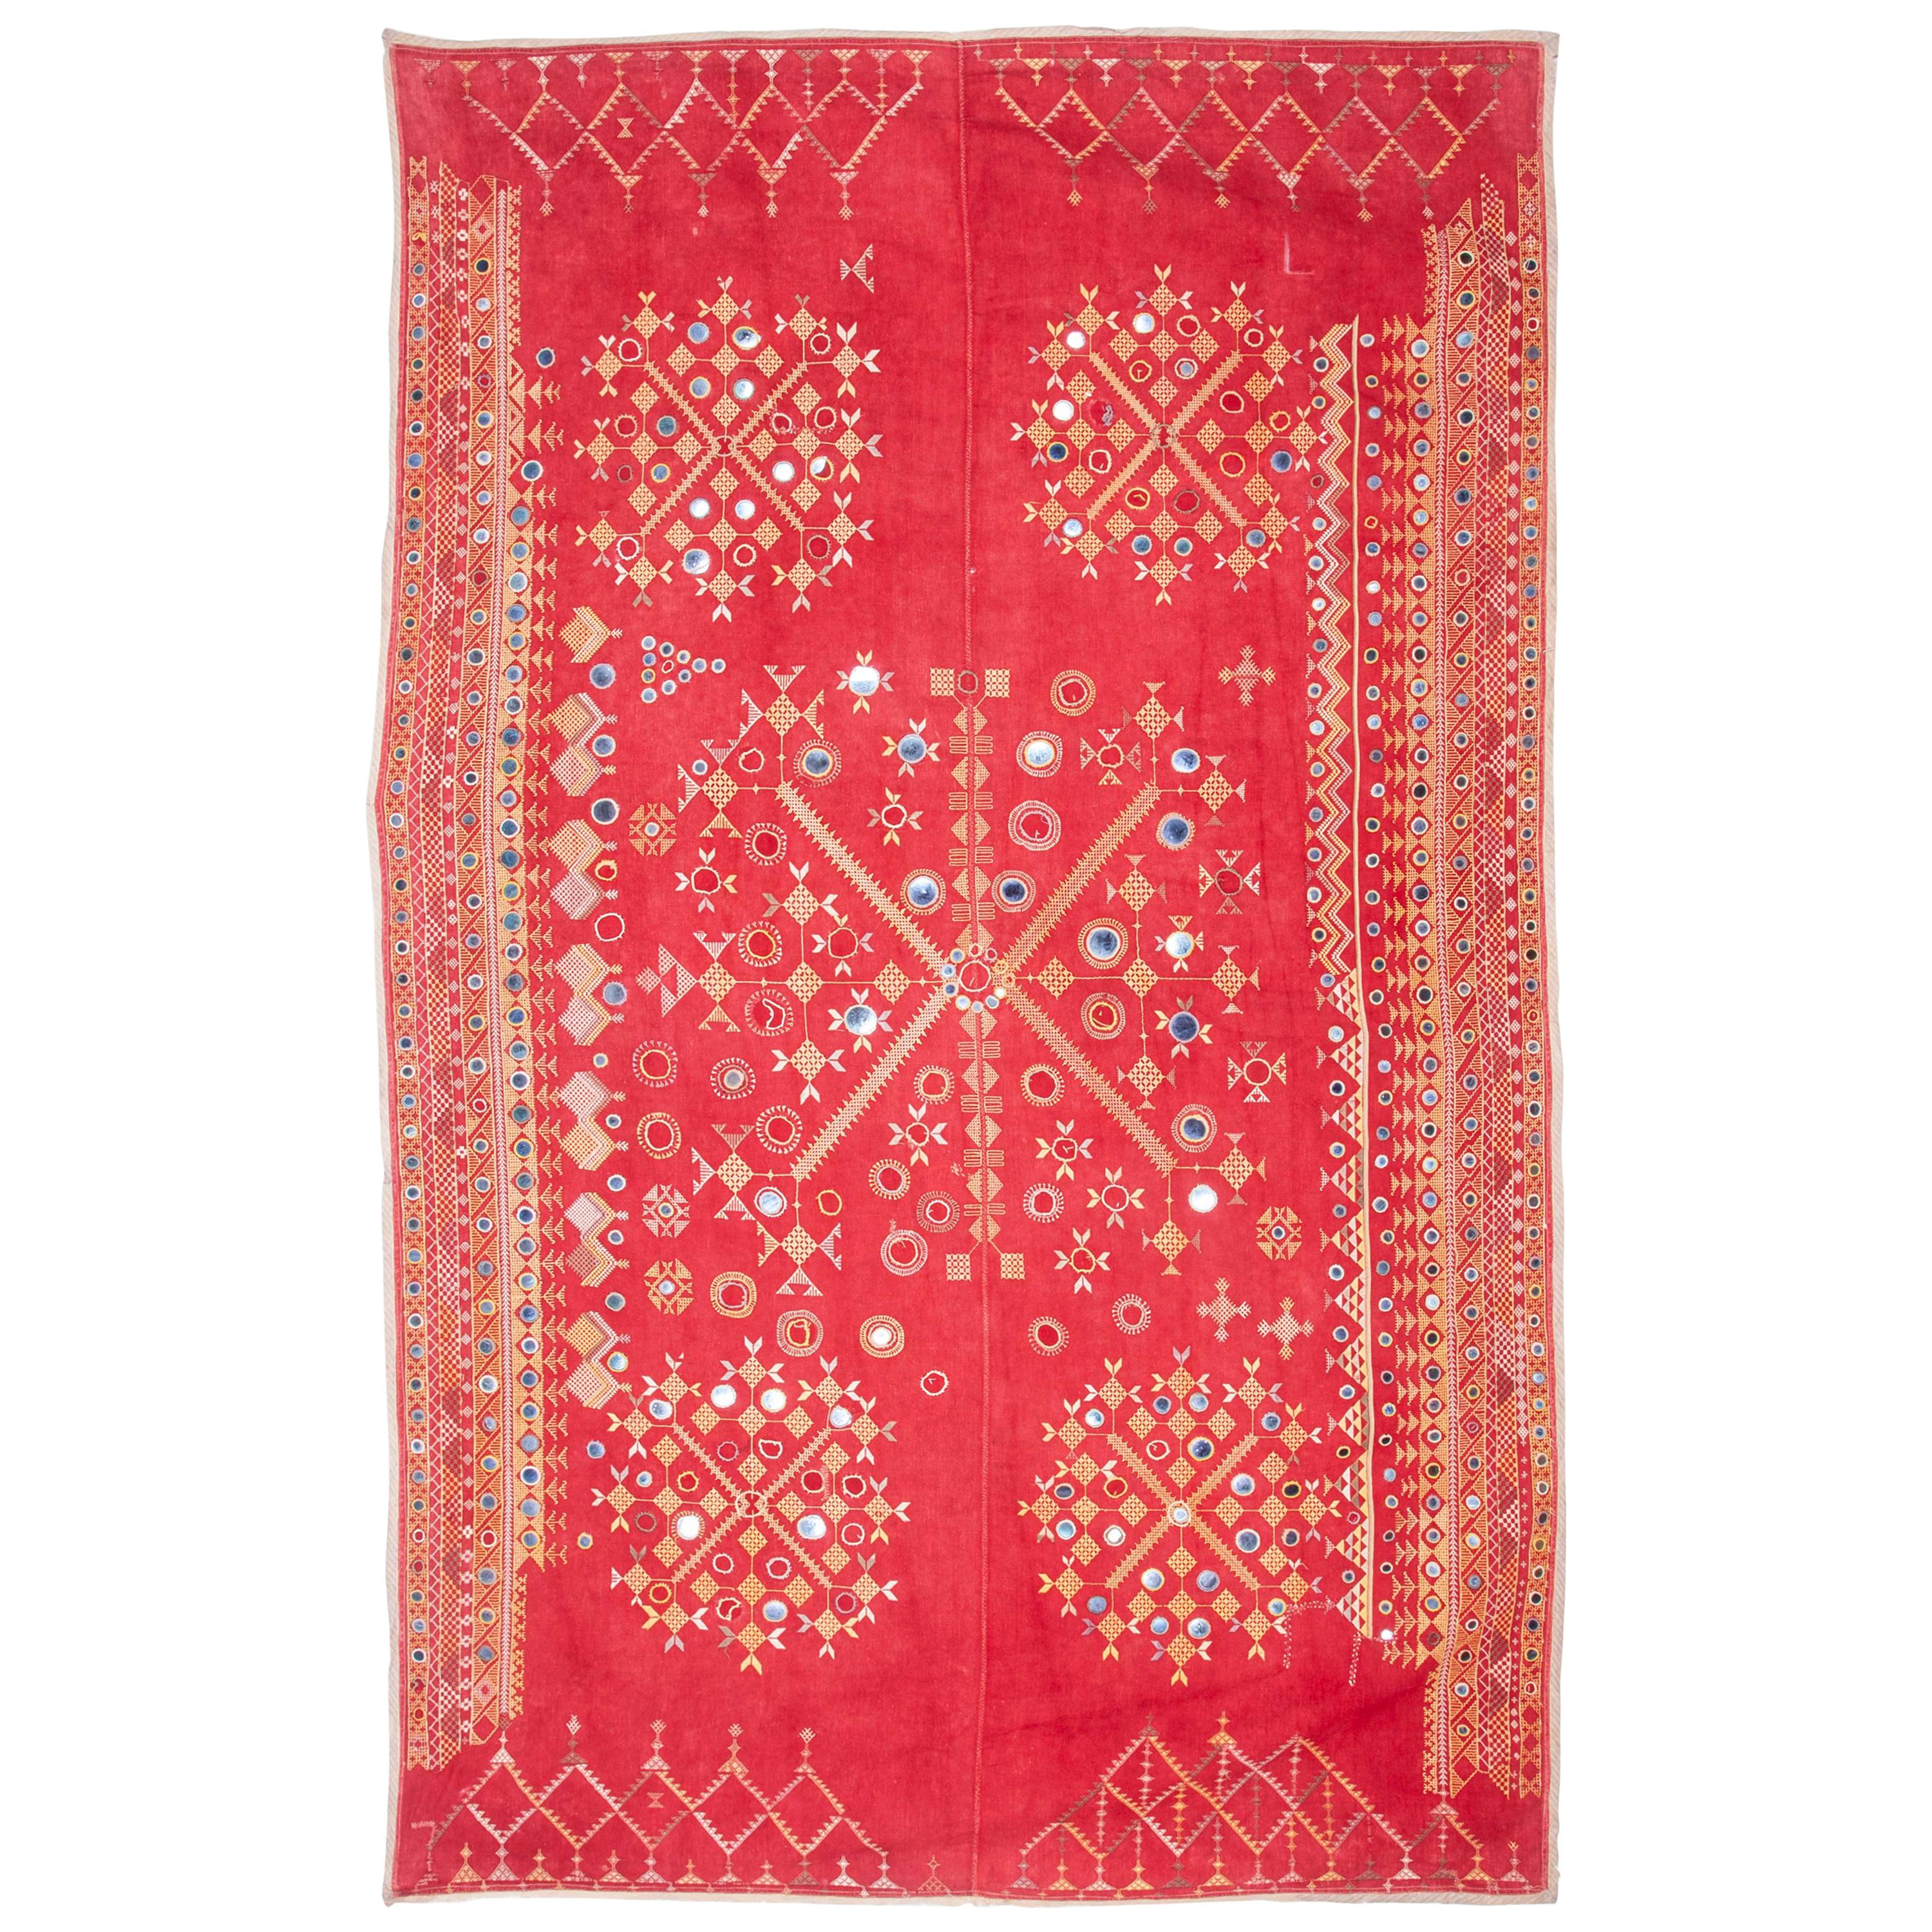 Cotton Embroidery from Rajasthan, India, Early 20th Century